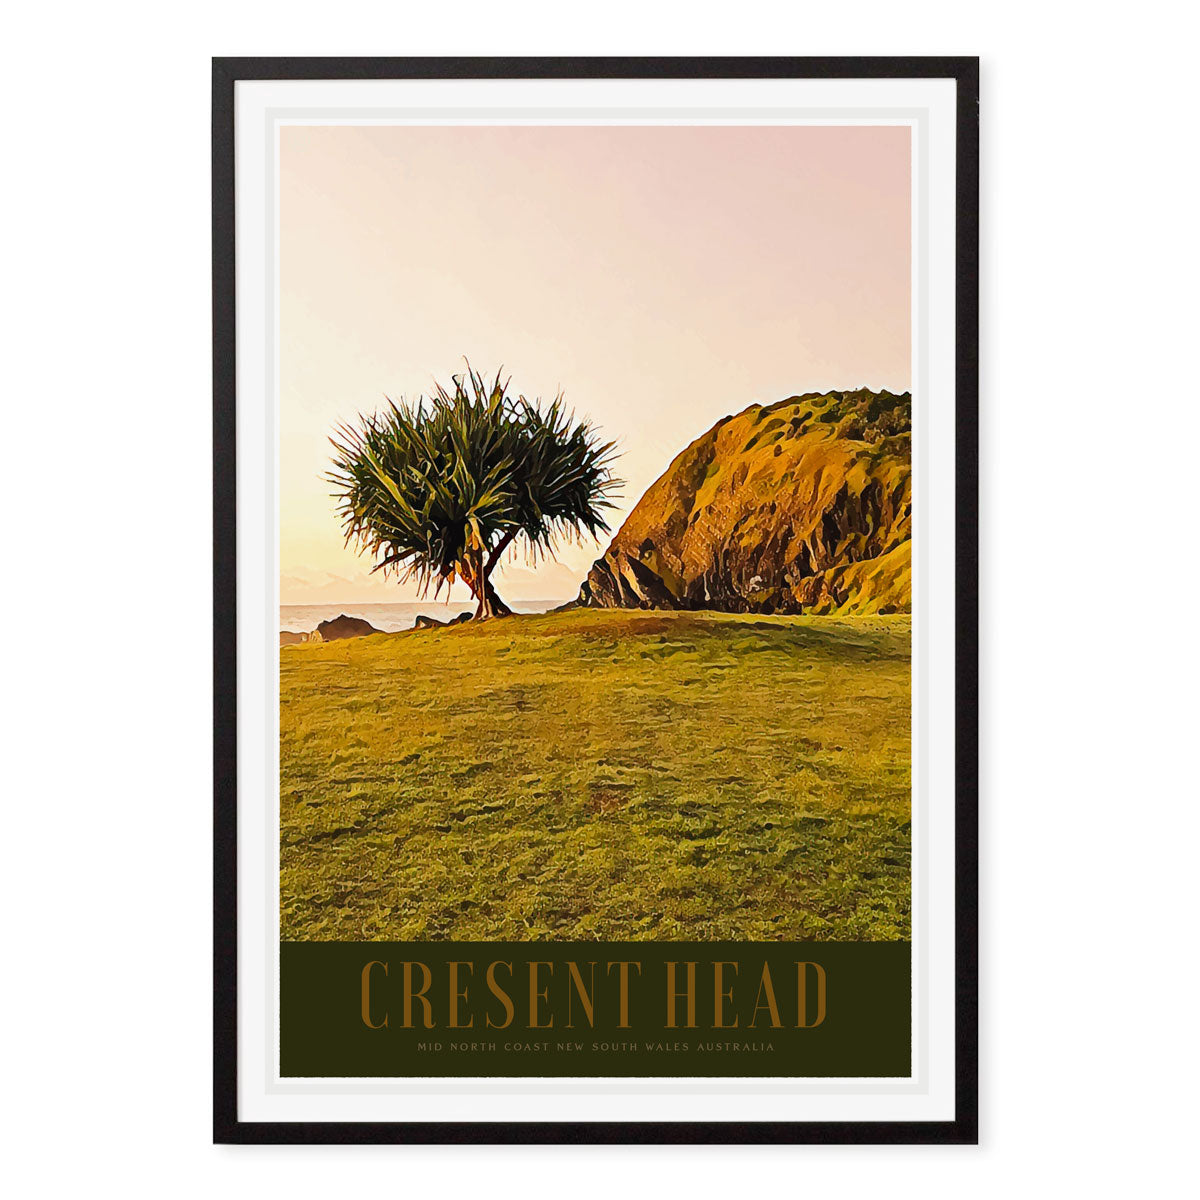 Cresent Head NSW Australia retro vintage poster print in black frame from Places We Luv